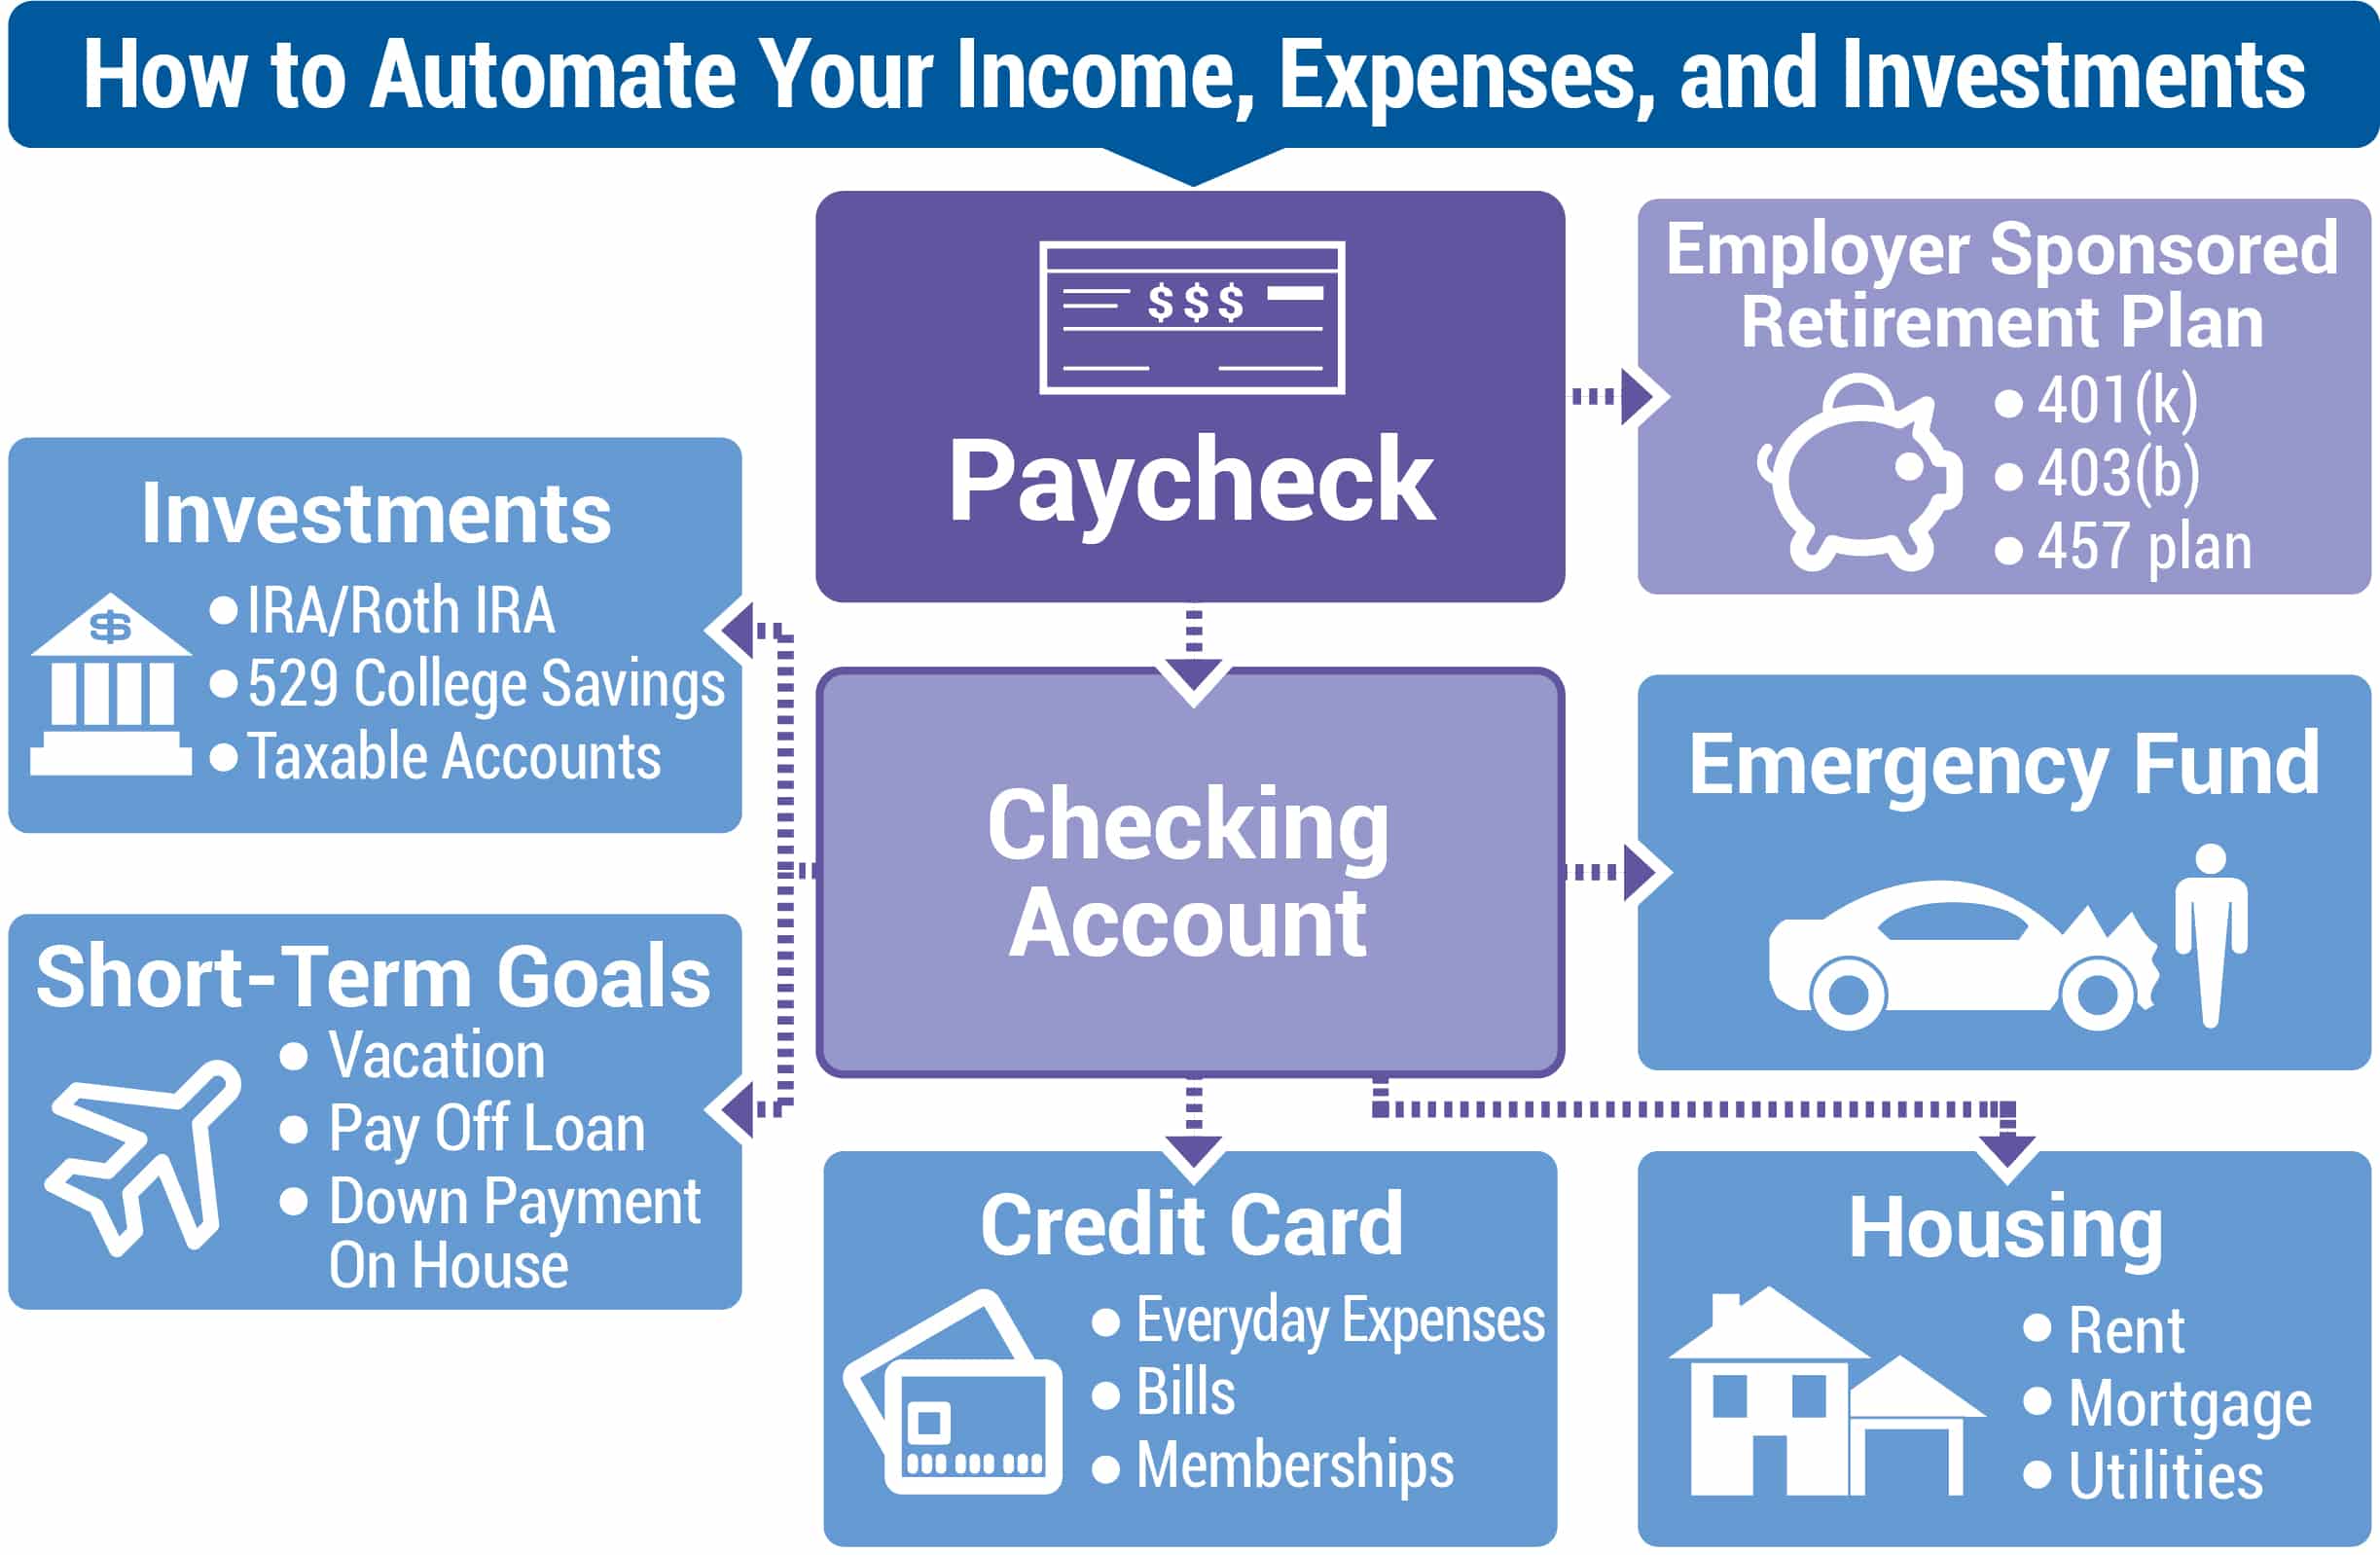 How to Automate Your Income, Expenses, and Investments